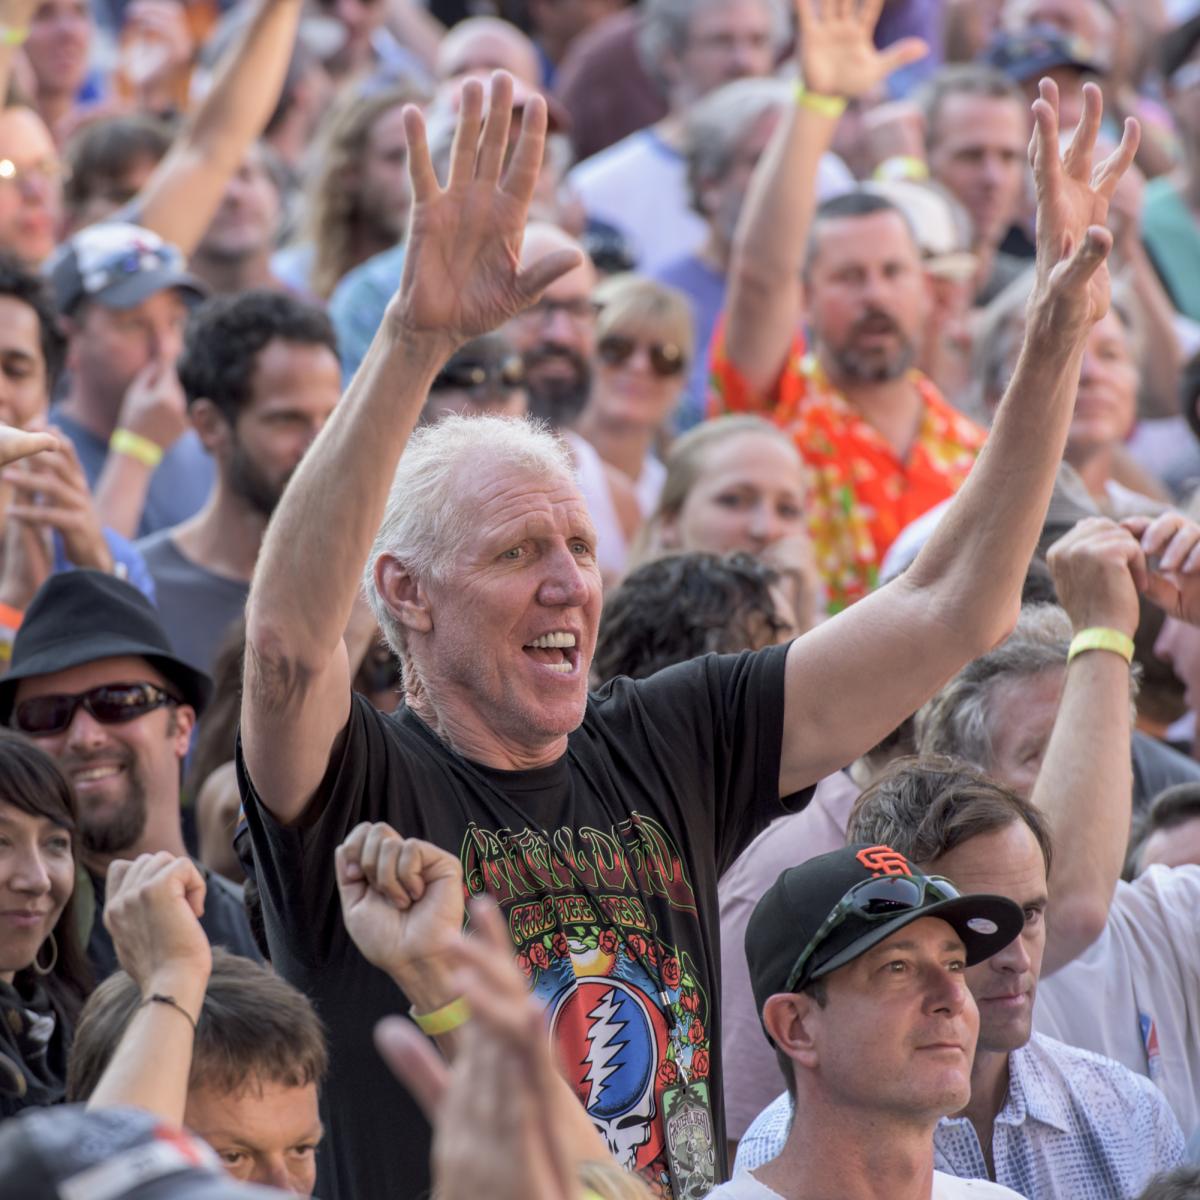 Bill Walton Is Having the Summer of His Life Touring with the Grateful Dead, News, Scores, Highlights, Stats, and Rumors